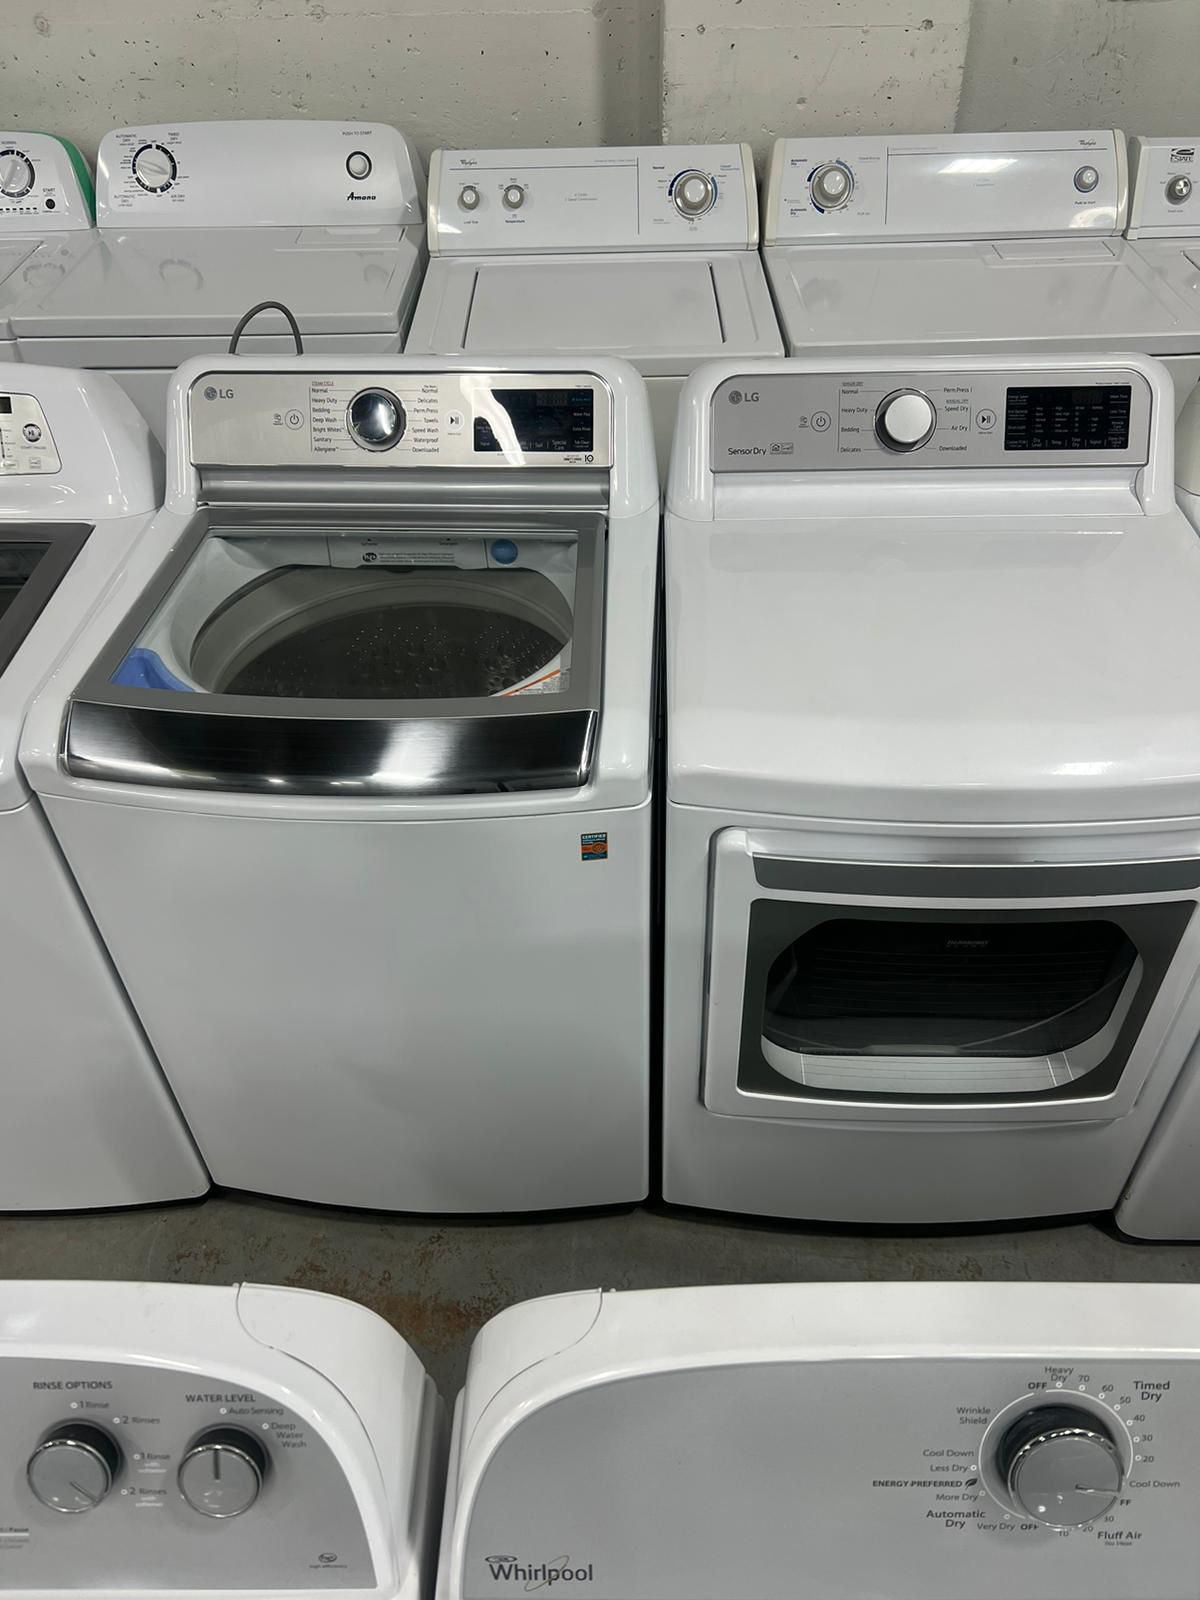 LG Washer End Dryer Sep Electric 